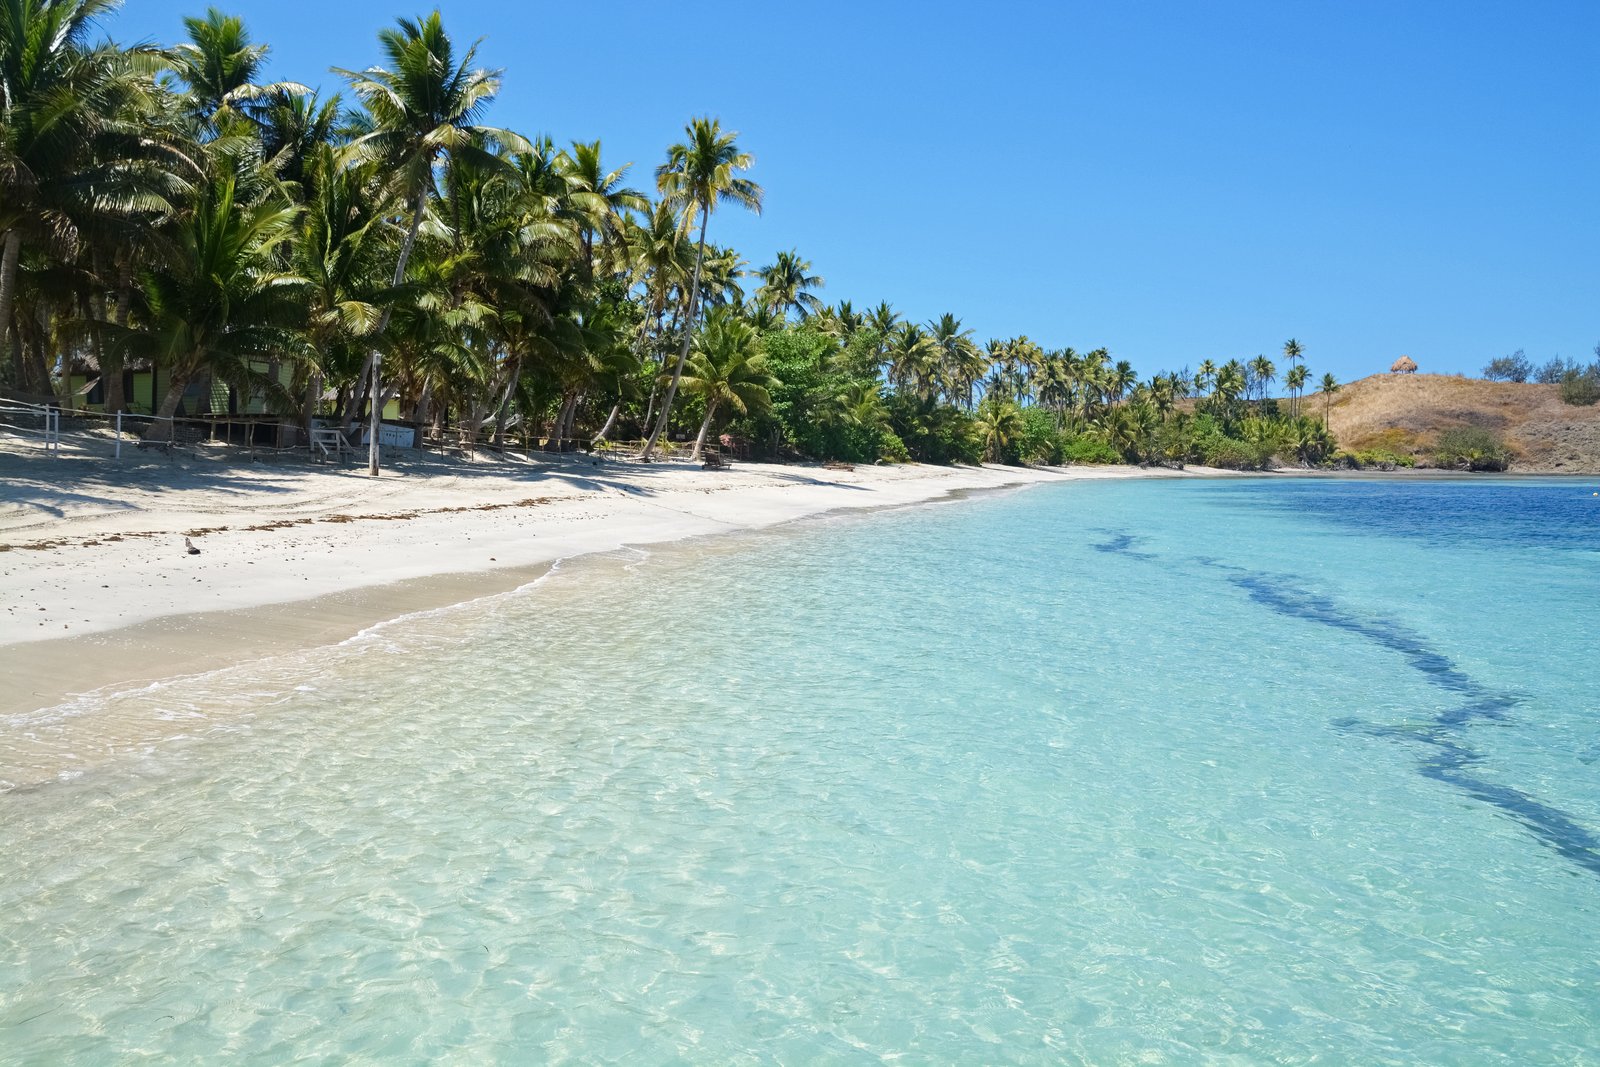 Fiji expected to receive 500,000 visitors in 2022